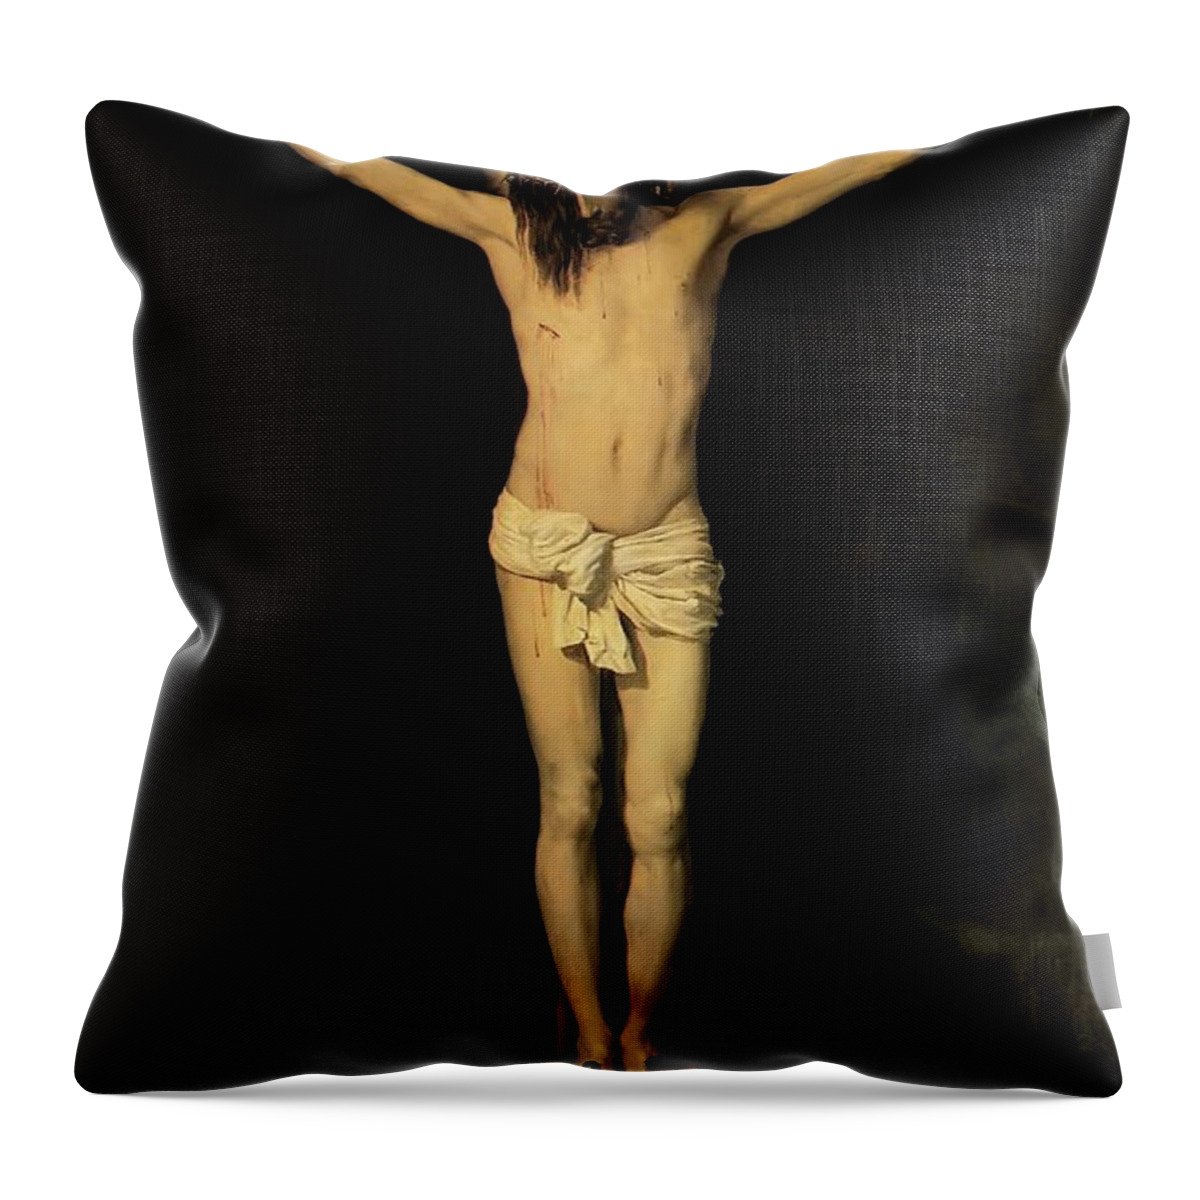 Diego Velazquez Throw Pillow featuring the painting Christ on the Cross by Diego Velazquez